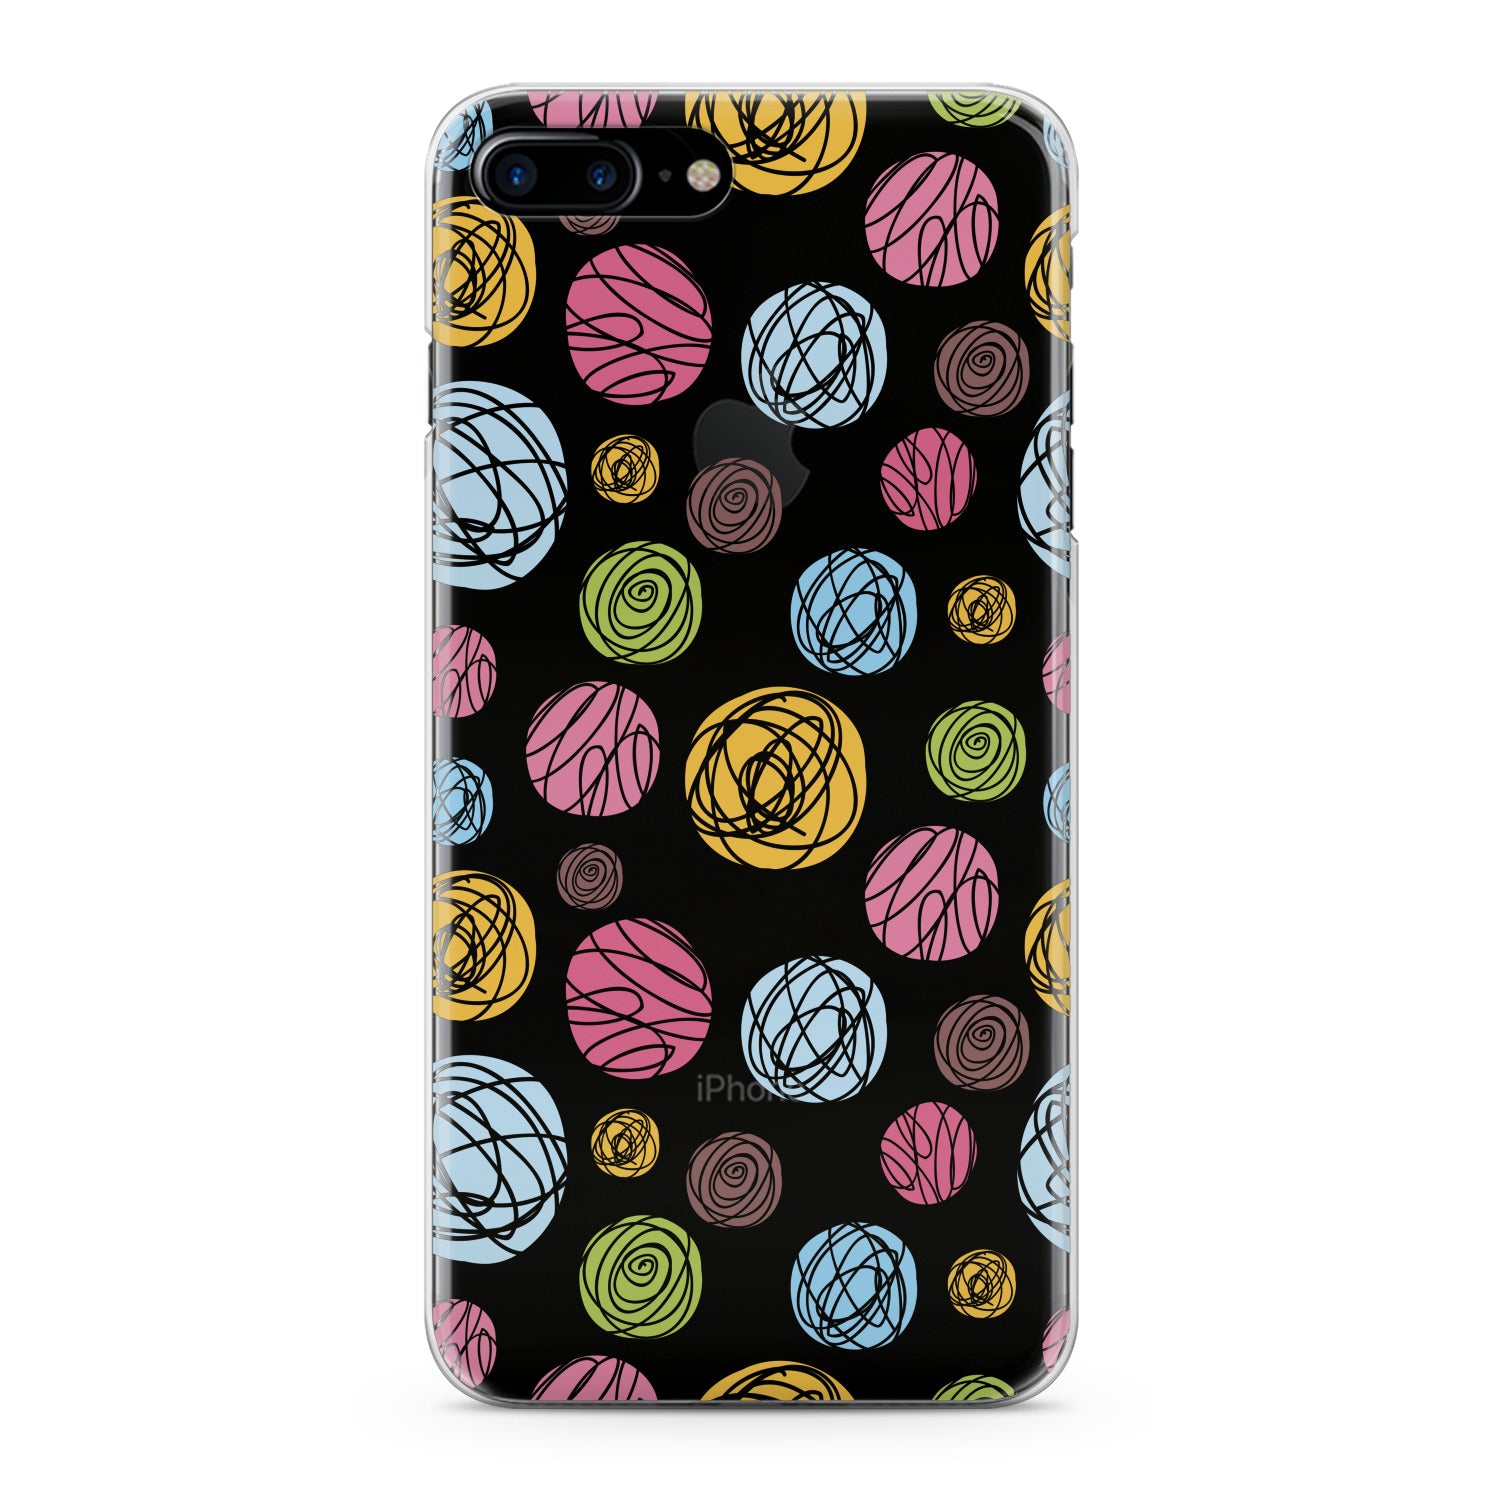 Lex Altern Colored Balls Phone Case for your iPhone & Android phone.